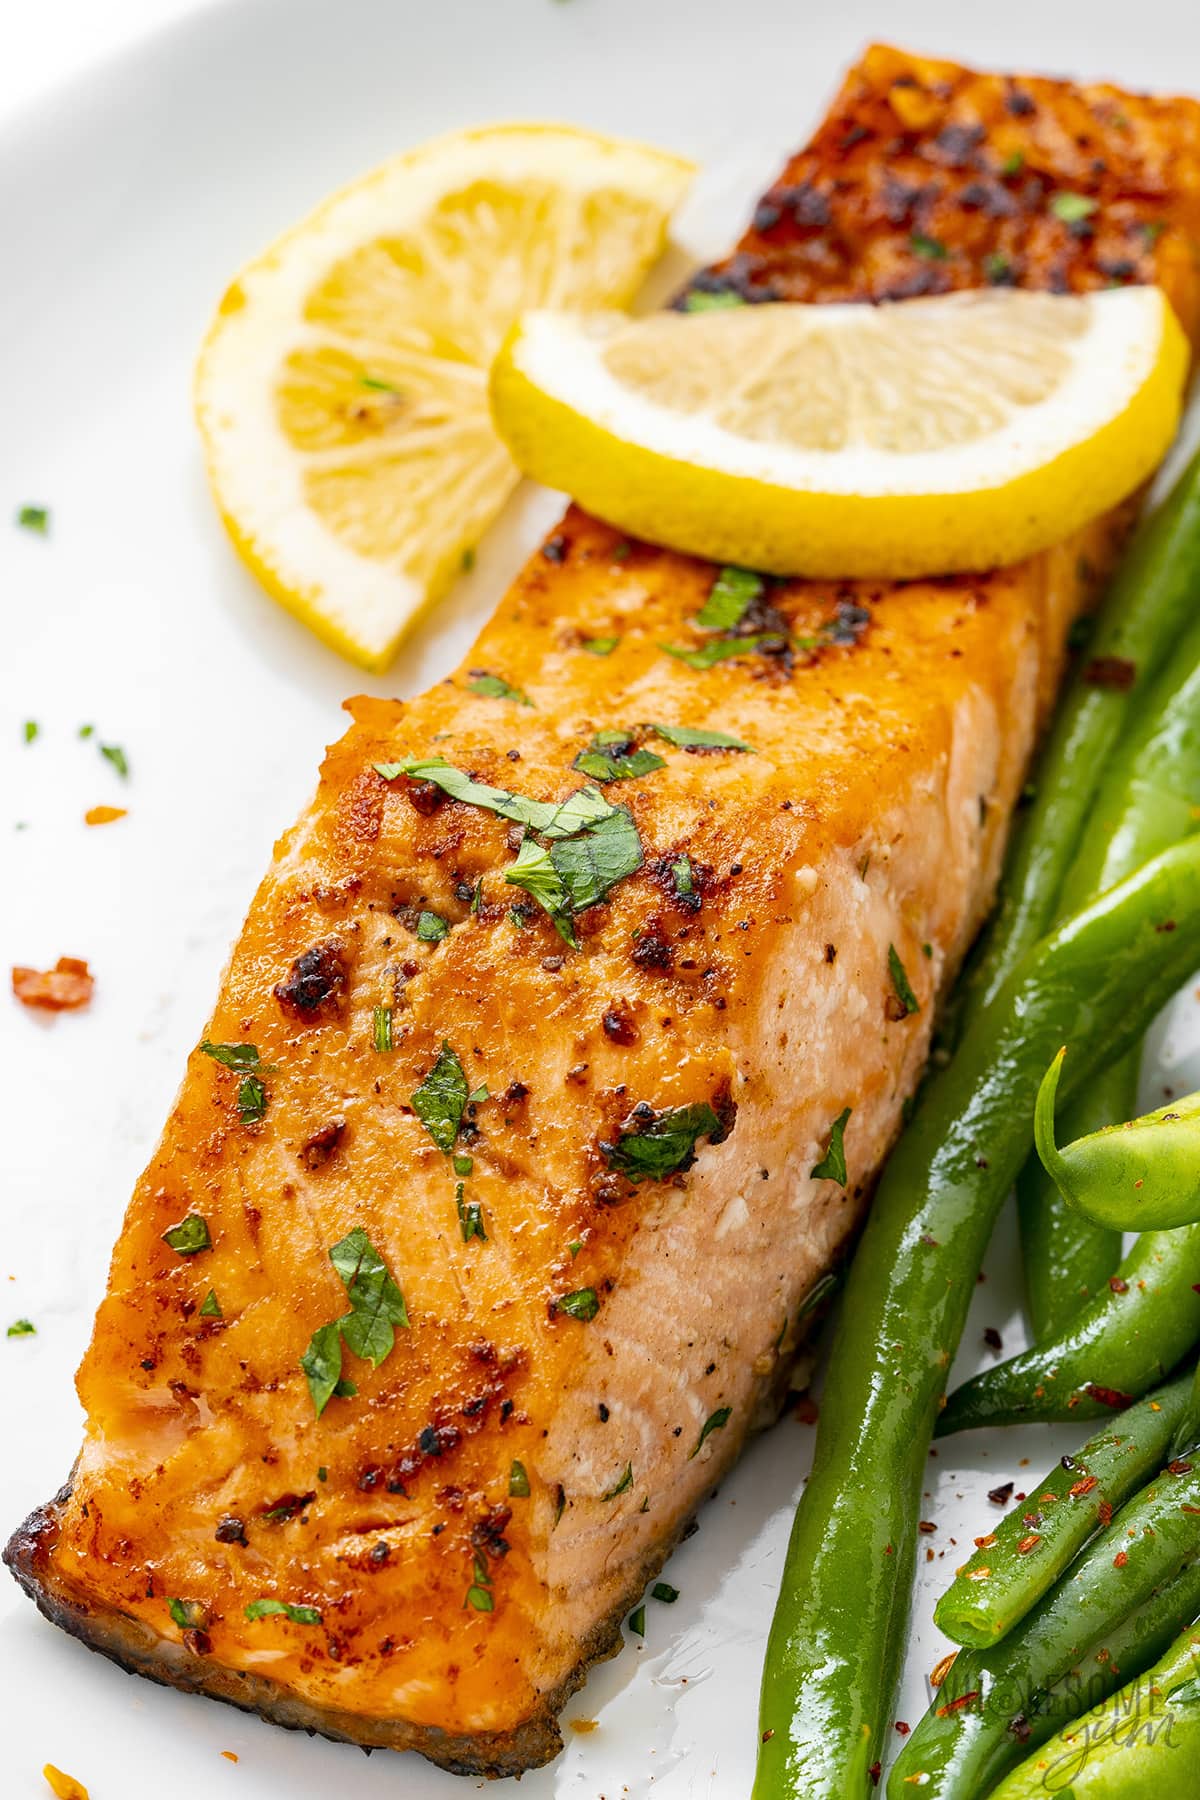 Broiled salmon on a plate with green beans.